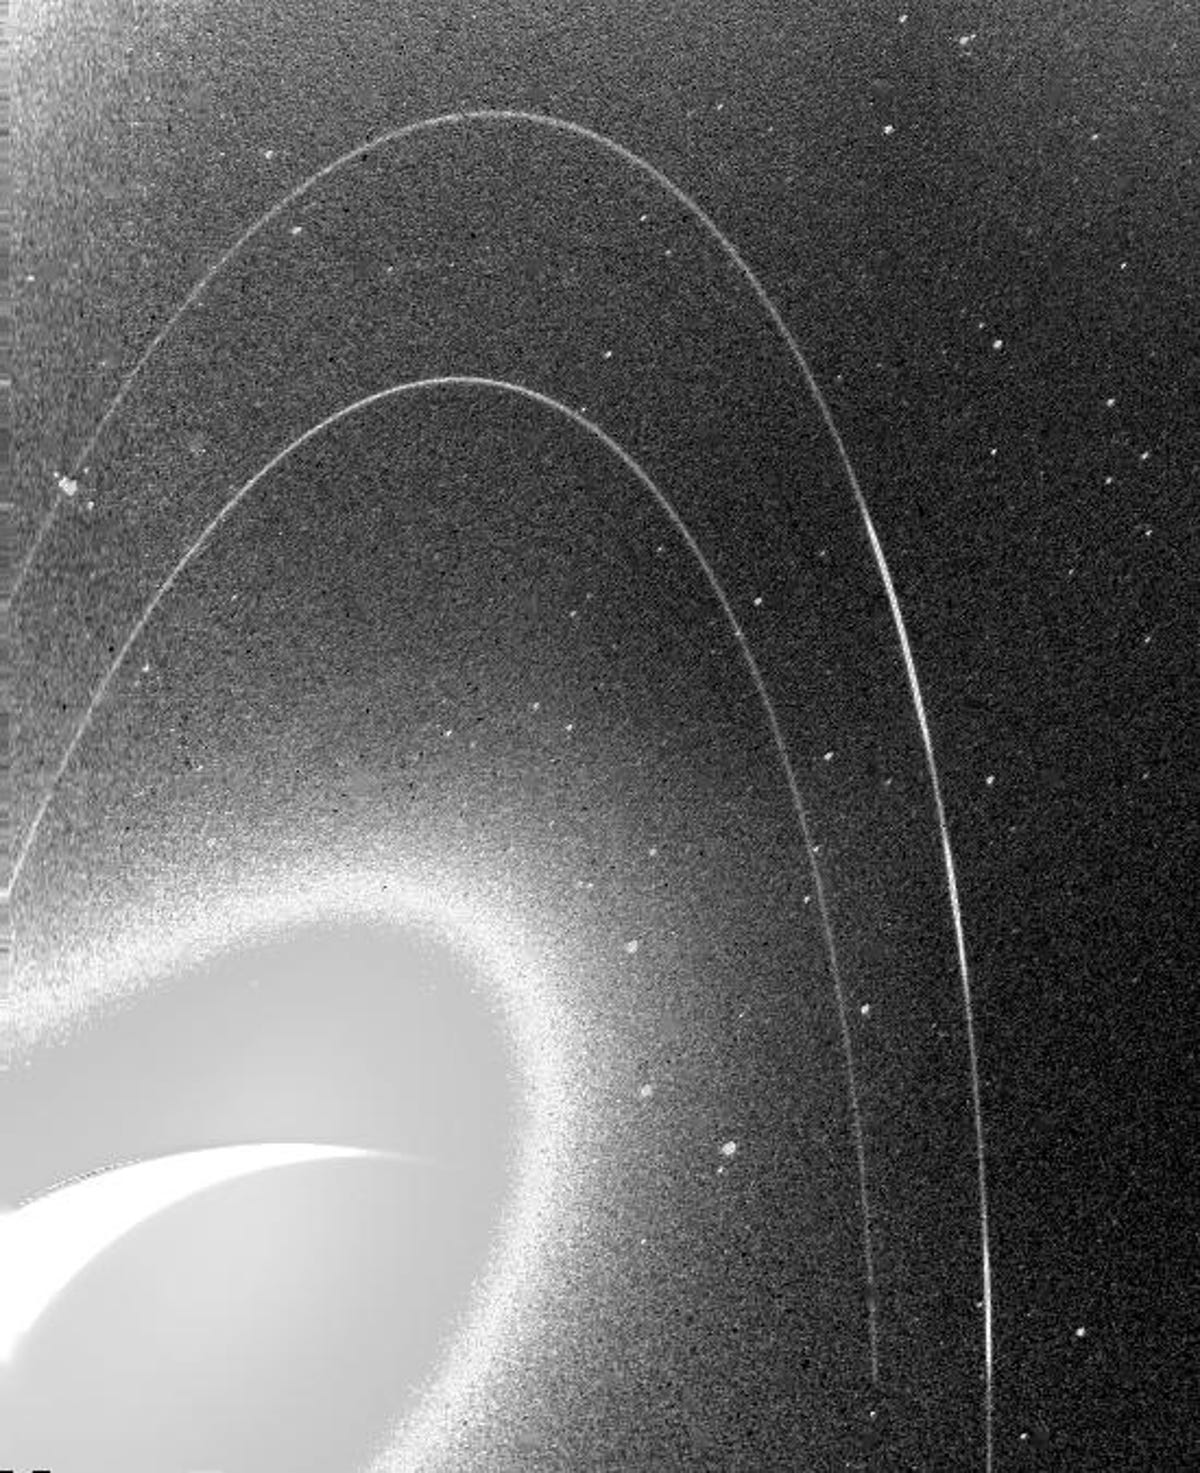 The grainy black-and-white image shows Neptune's fragile rings.